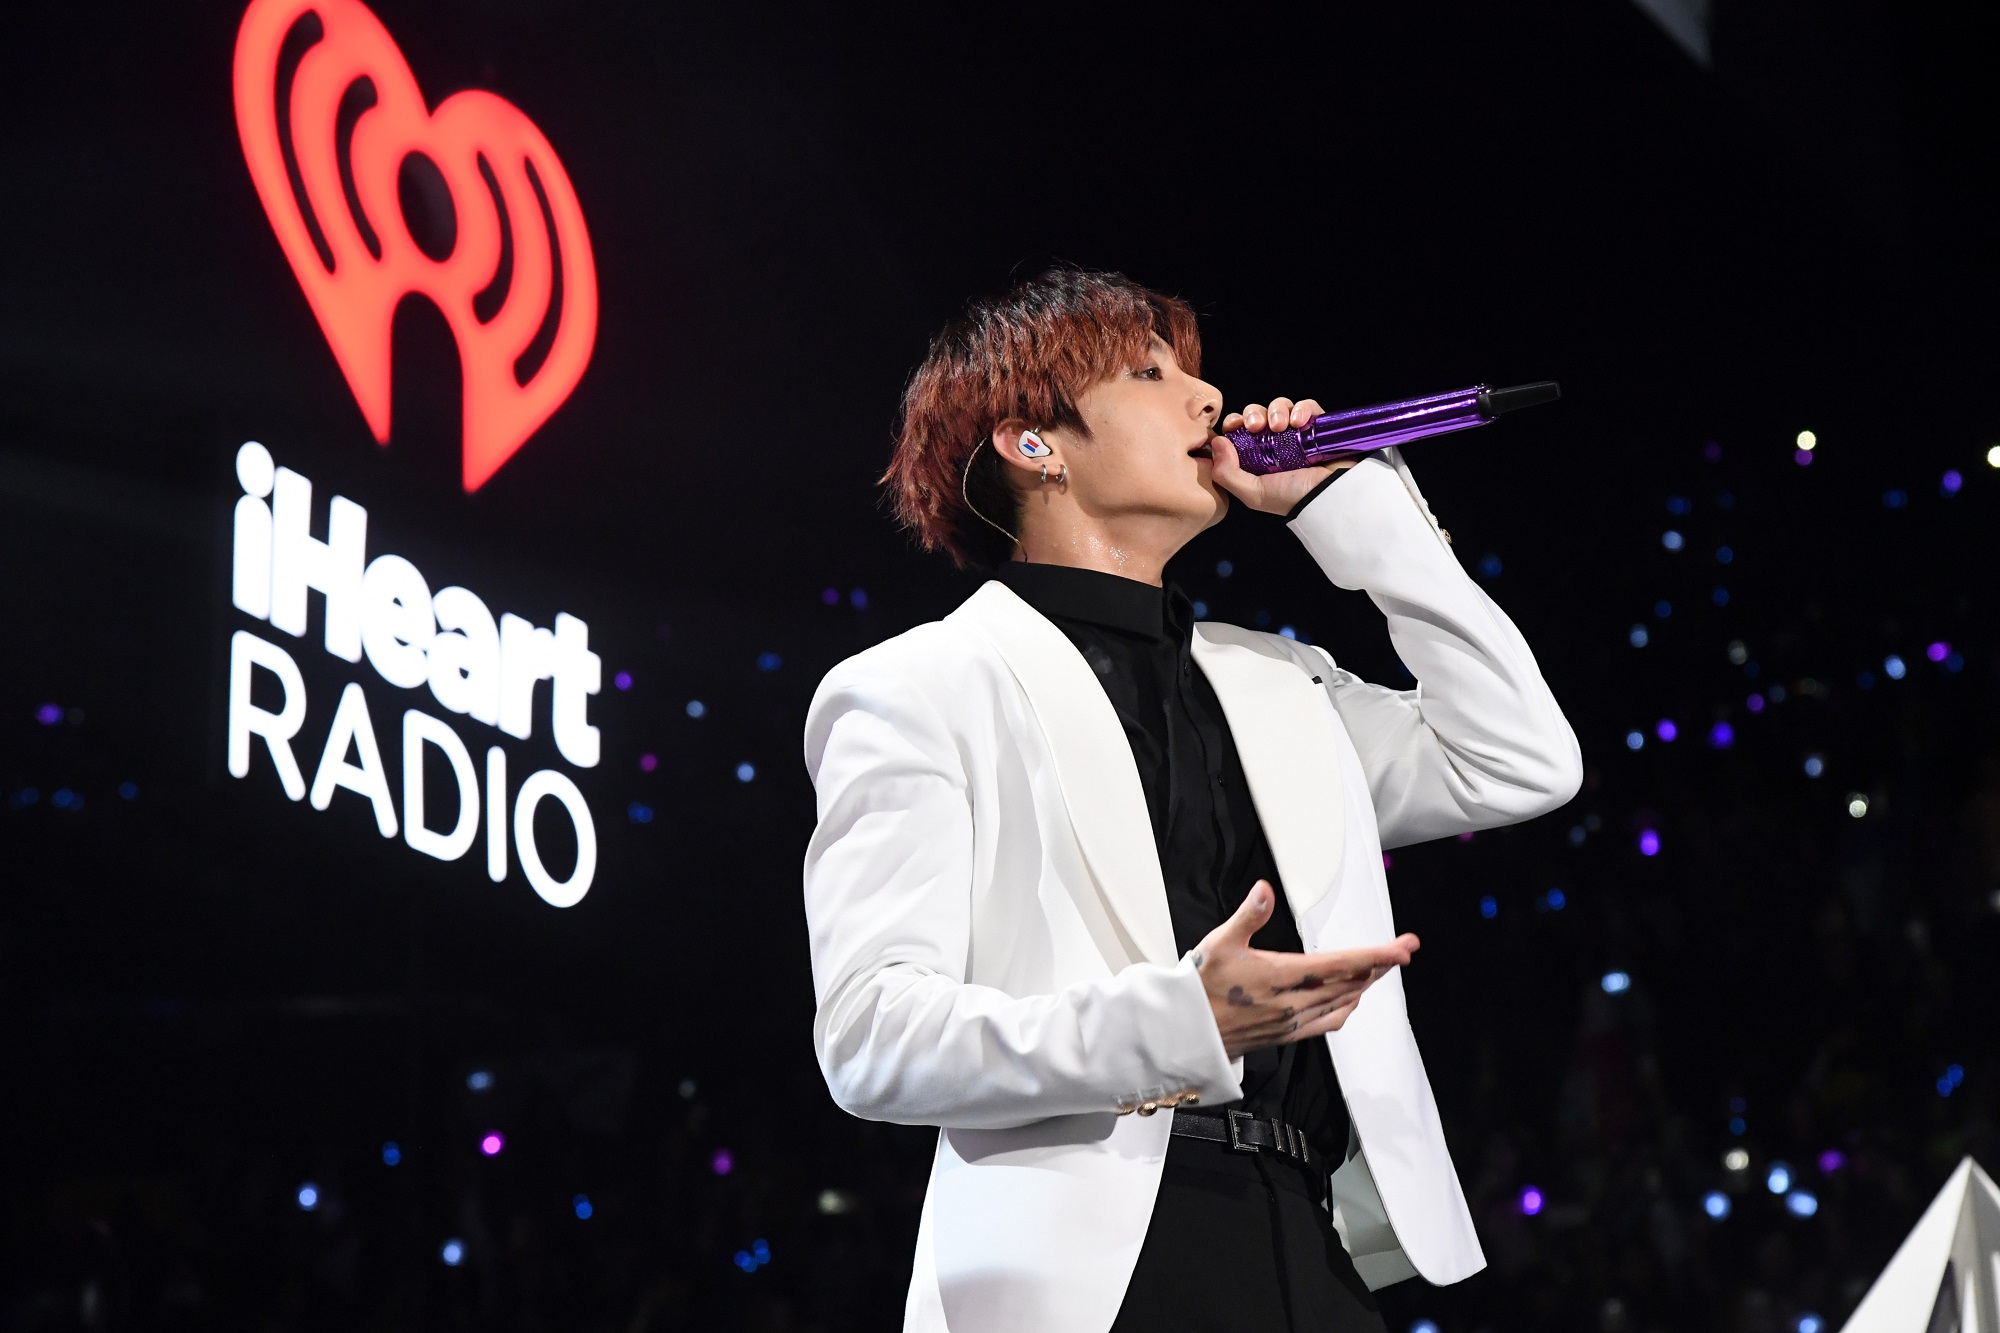 Jungkook of BTS sings into a purple microphone while performing during 102.7 KIIS FM's Jingle Ball 2019